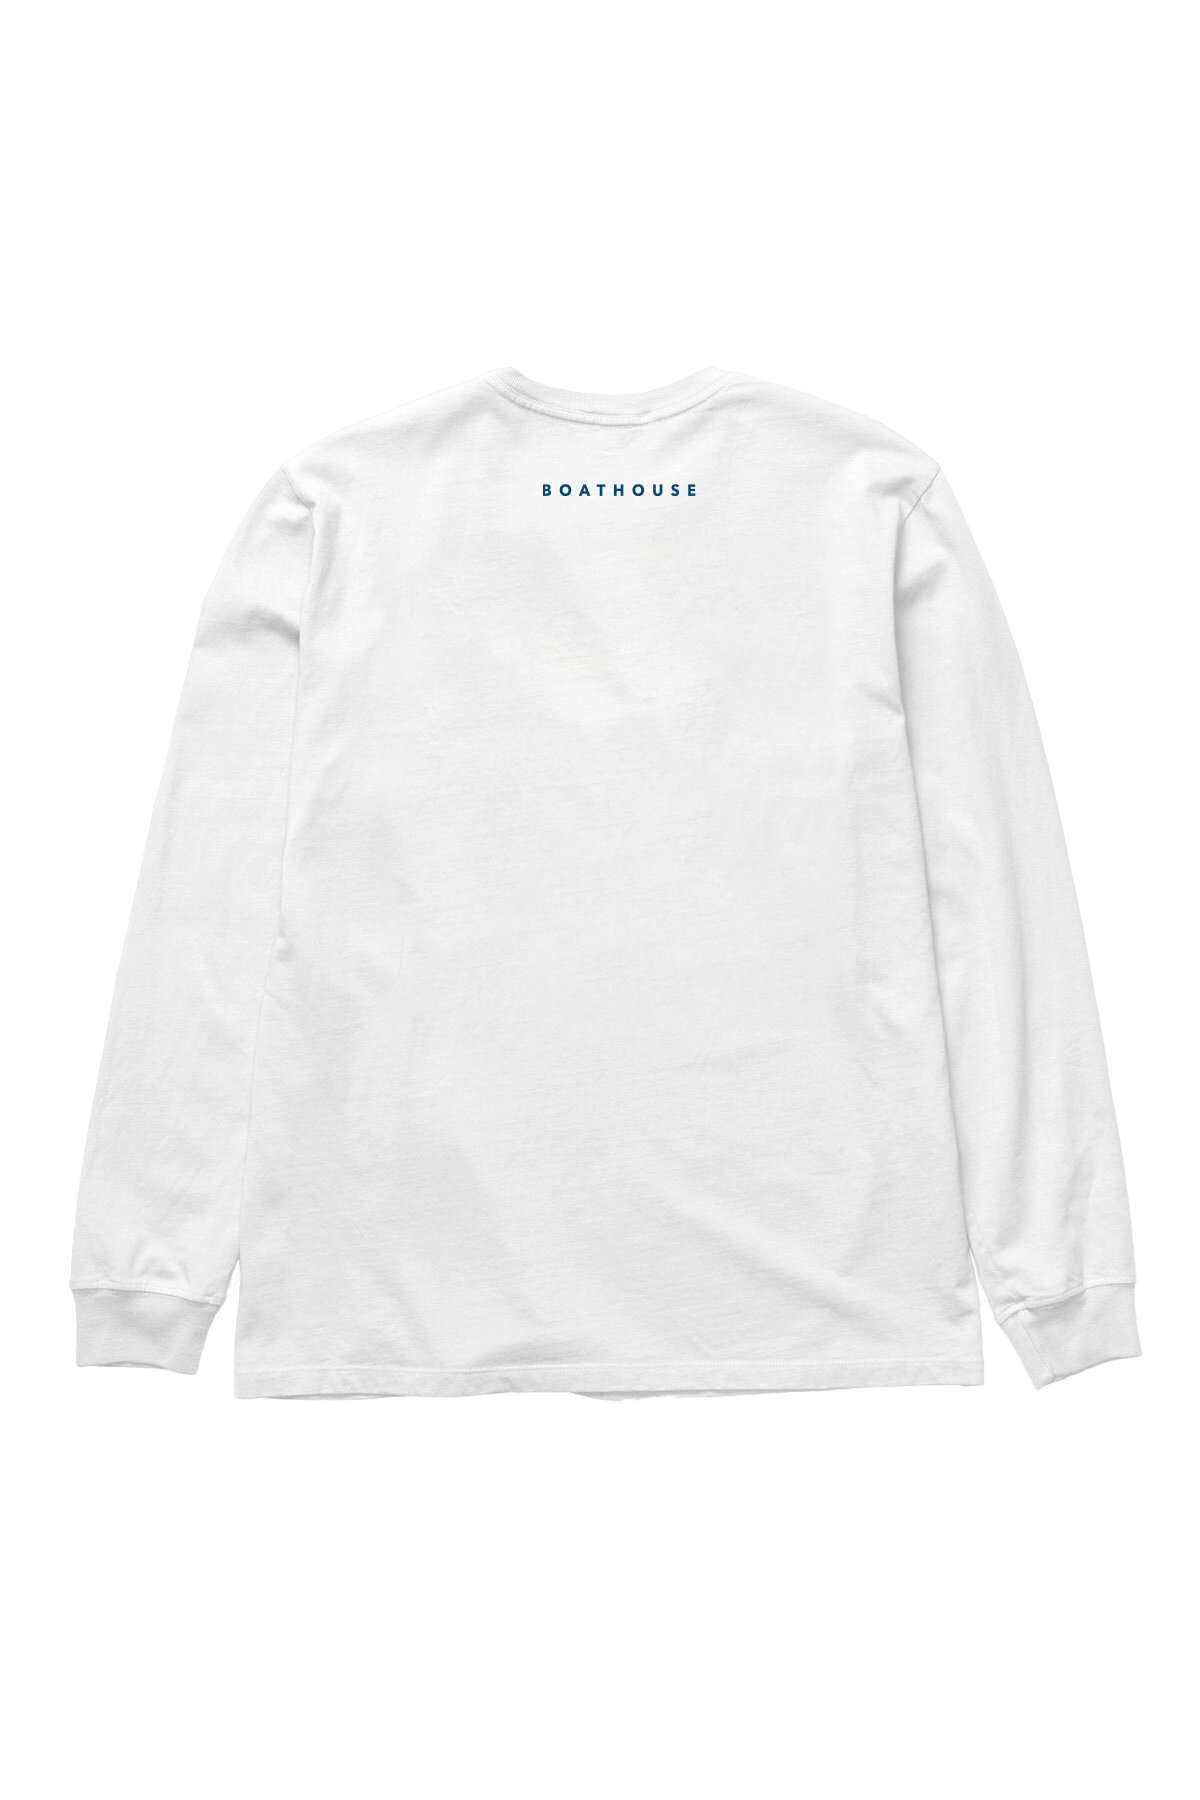 Boathouse Philly Love Long Sleeve